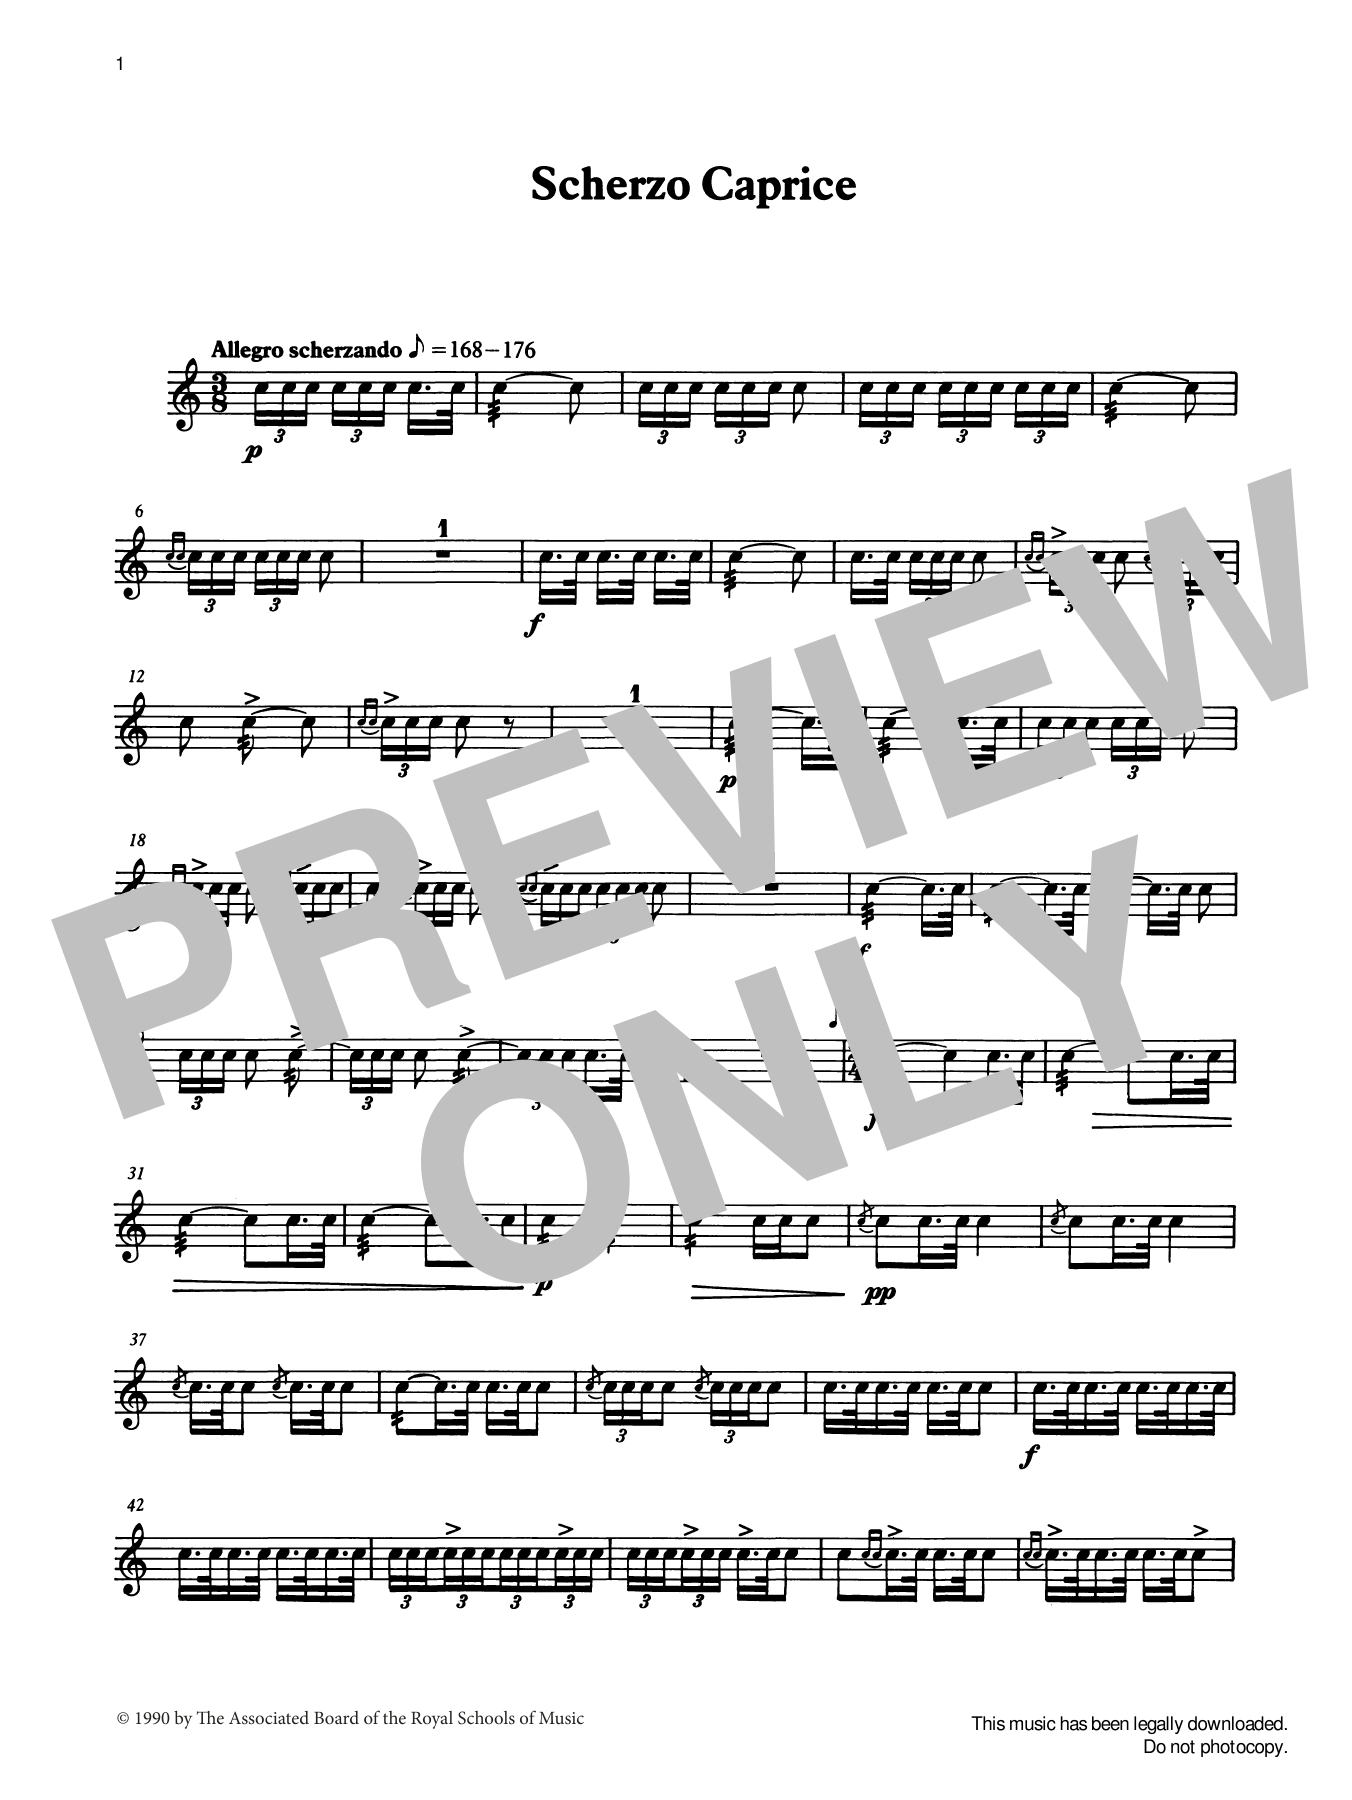 Download Ian Wright and Kevin Hathaway Scherzo Caprice from Graded Music for S Sheet Music